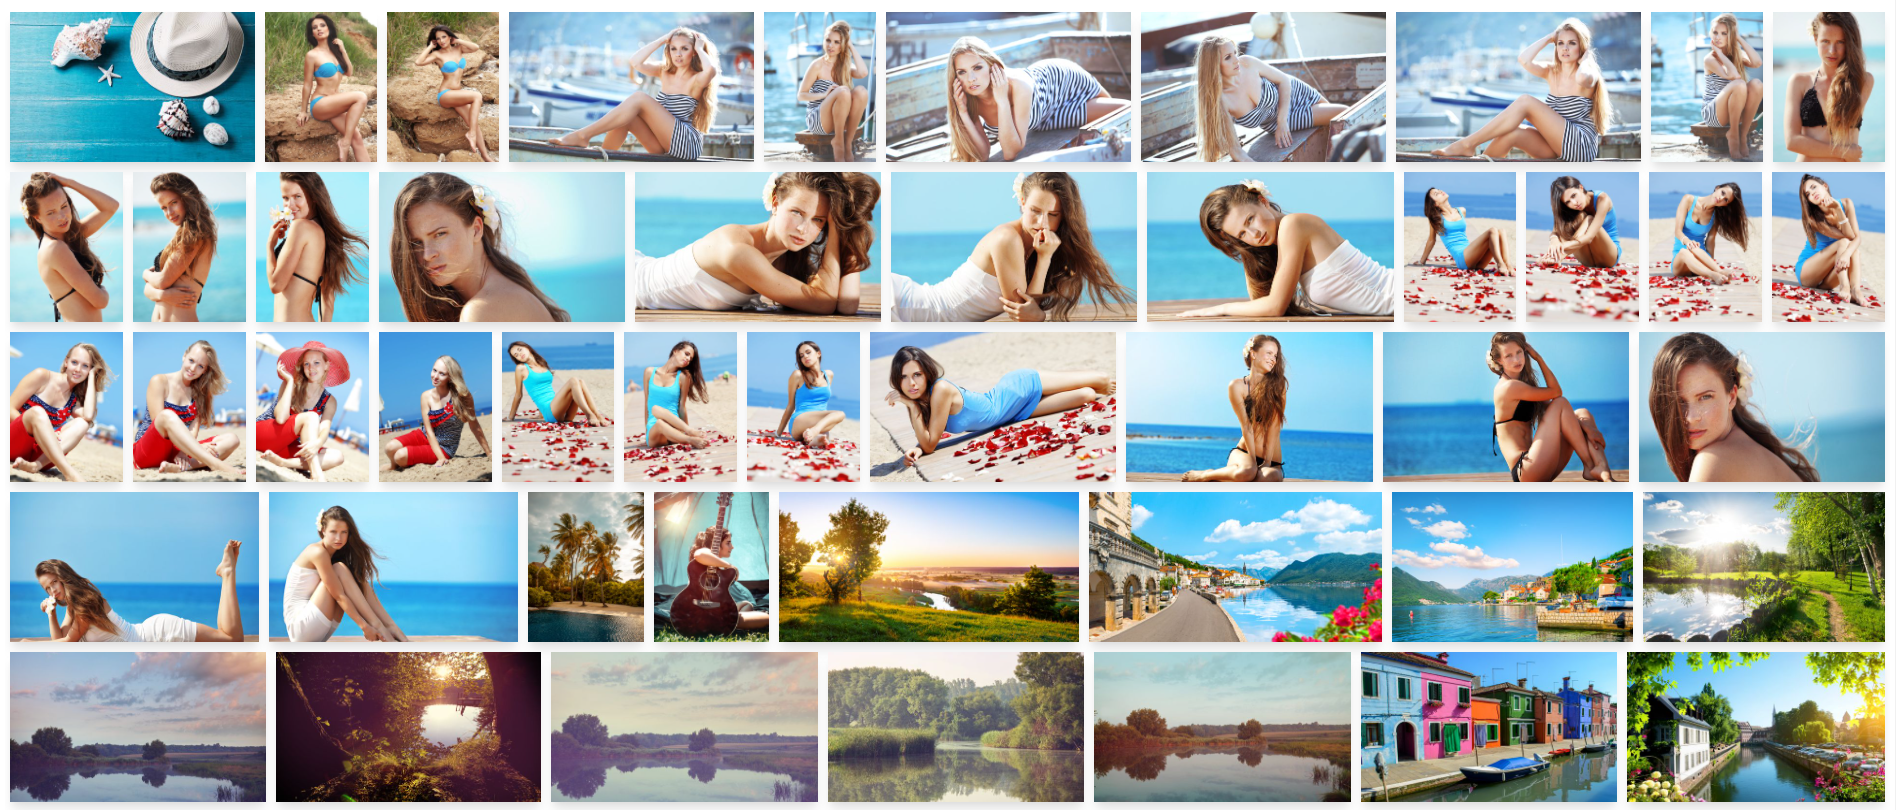 UnlimPhotos Stock Images and Vectors in the Summer category